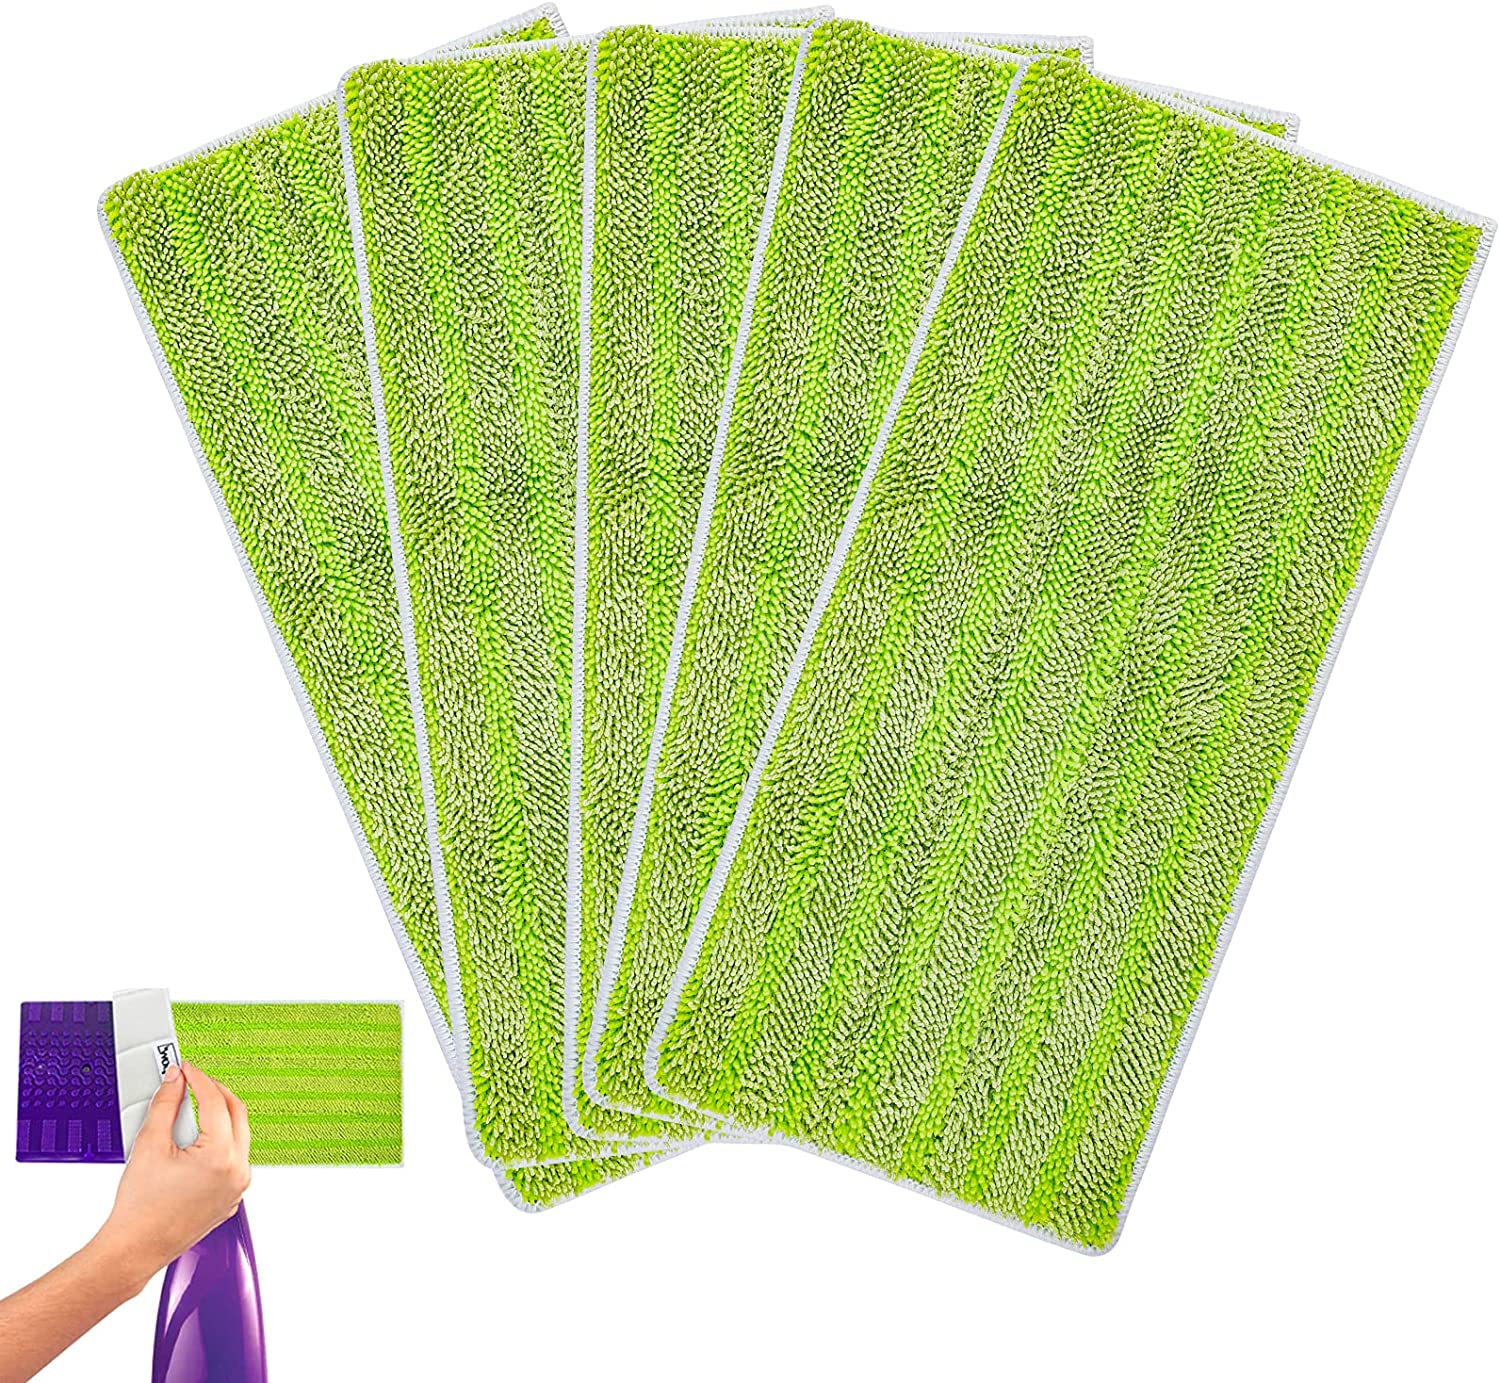 KEEPOW 5703M 11.8*5.5 Inches Green Reusable Mop Pads 5 Pcs